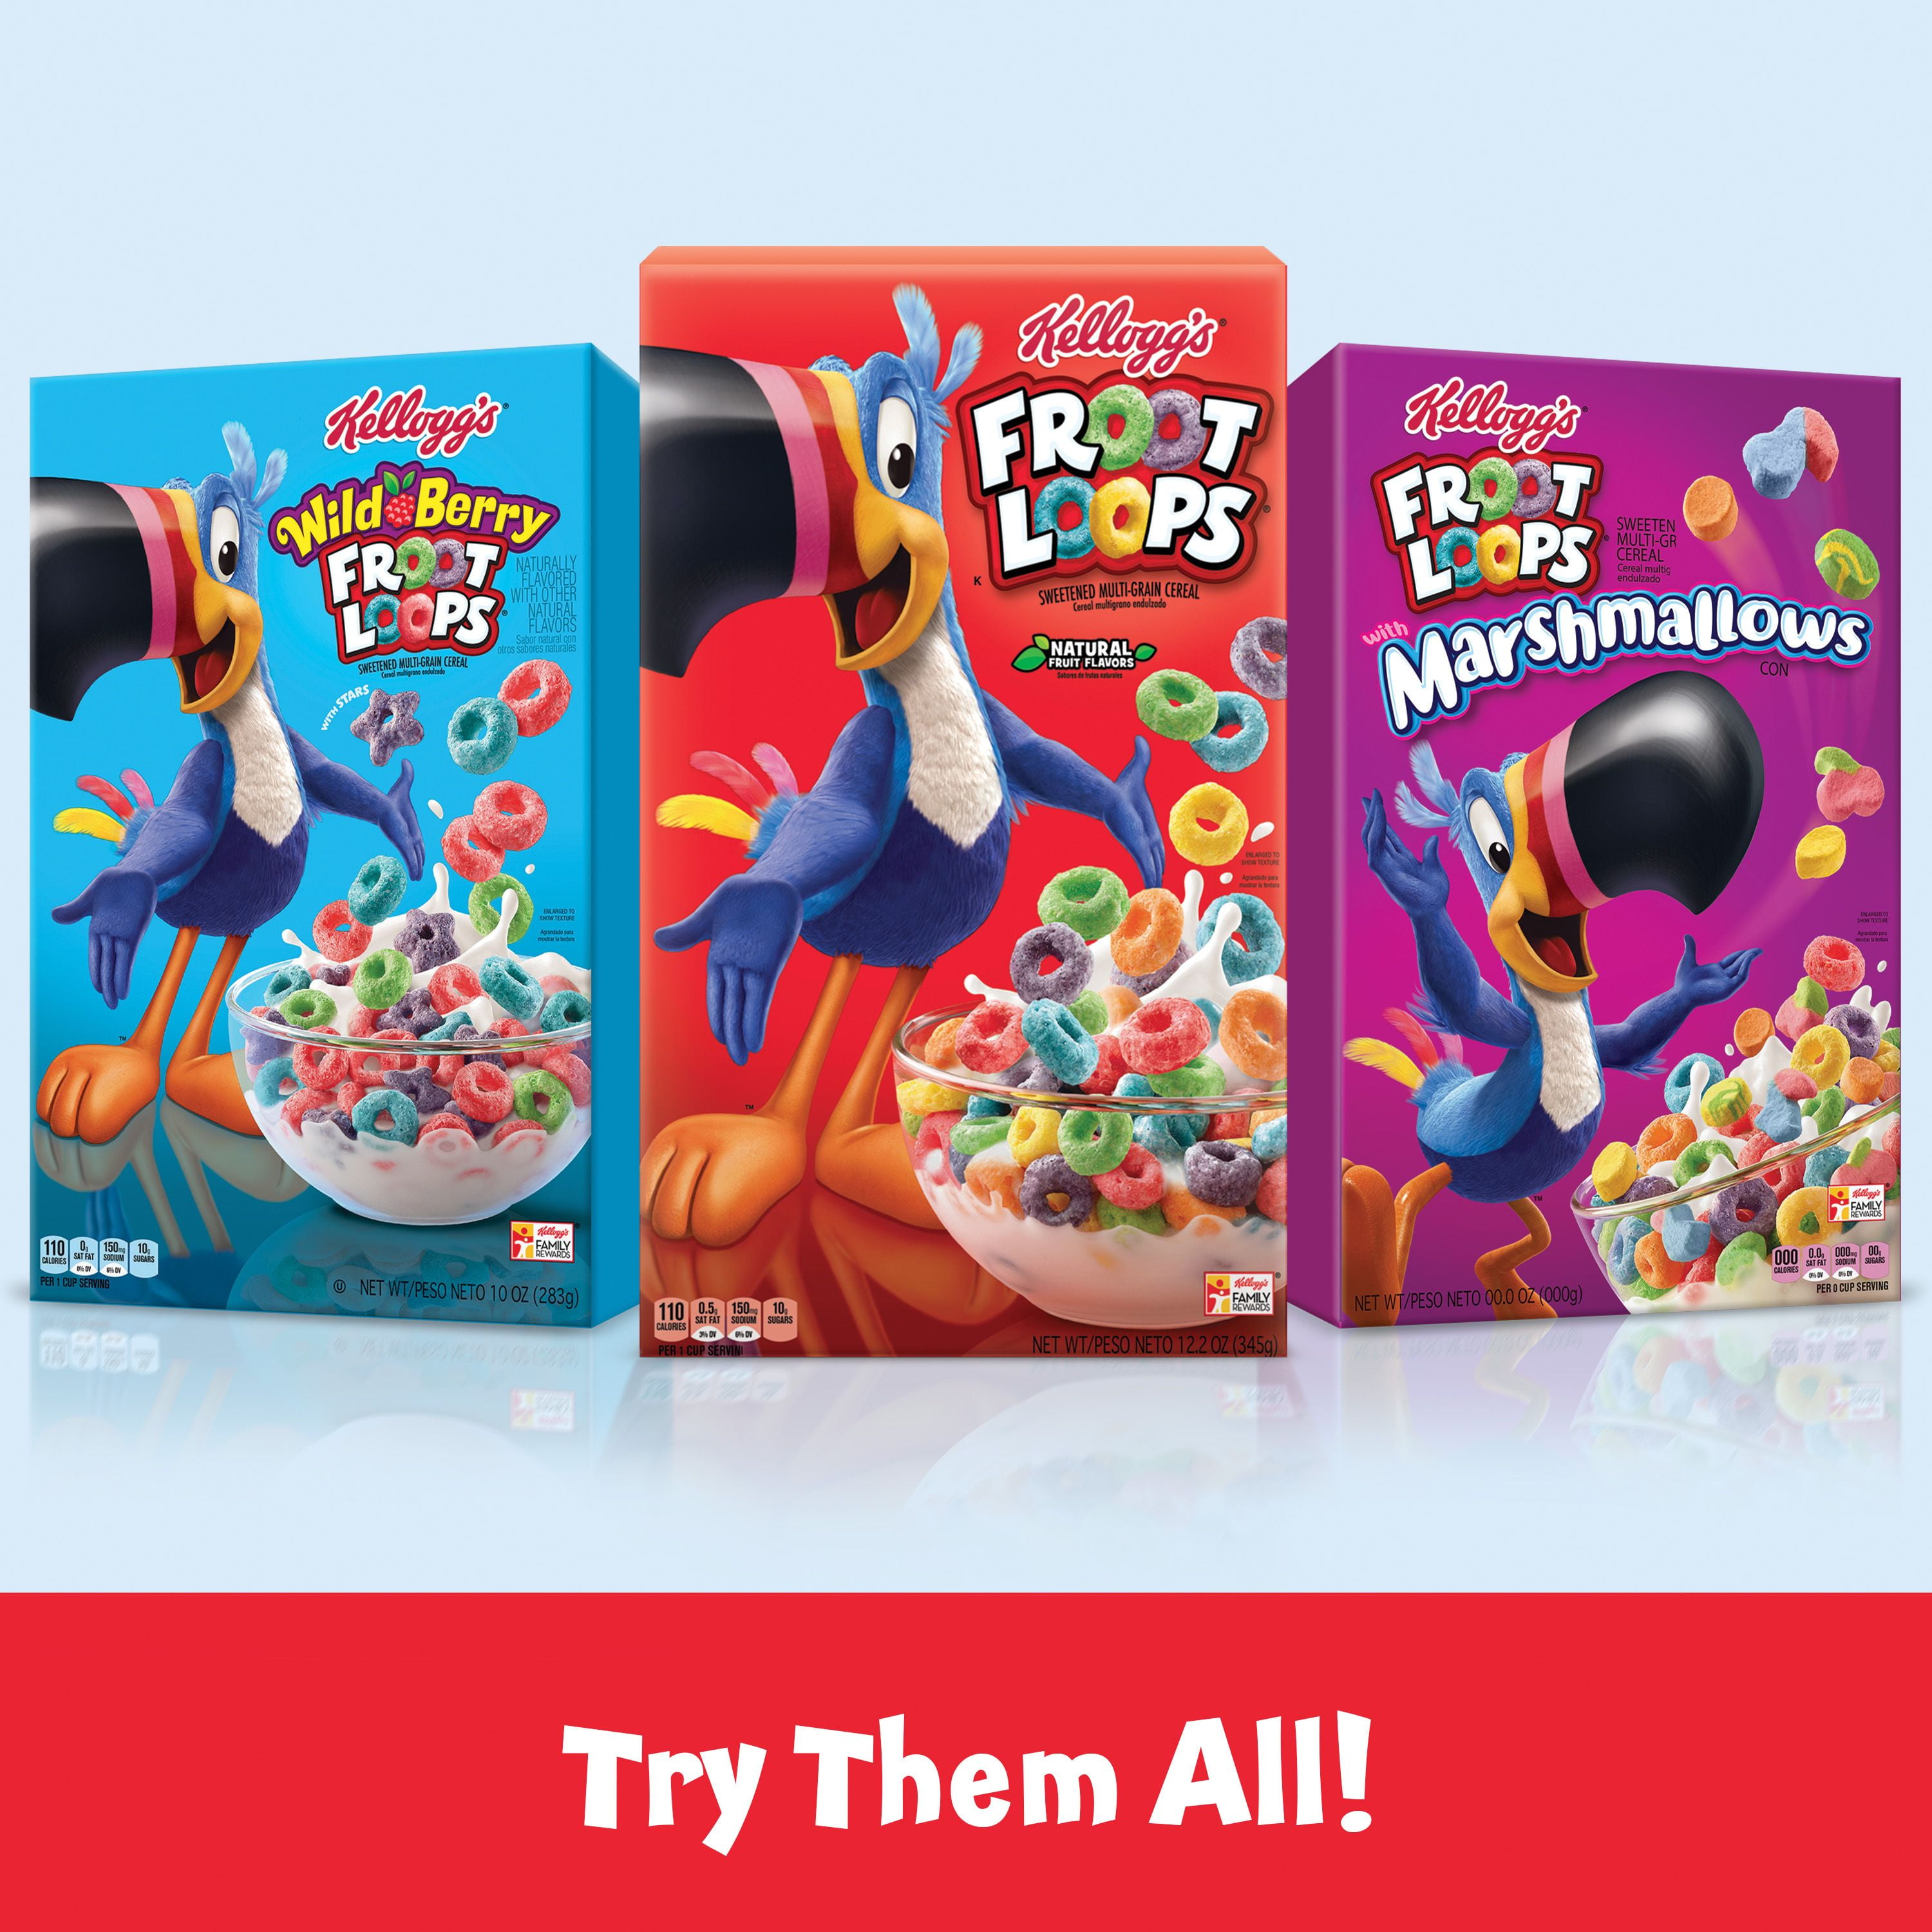 Kellogg's® Froot Loops® Cereal, 12.2 oz - Fry's Food Stores